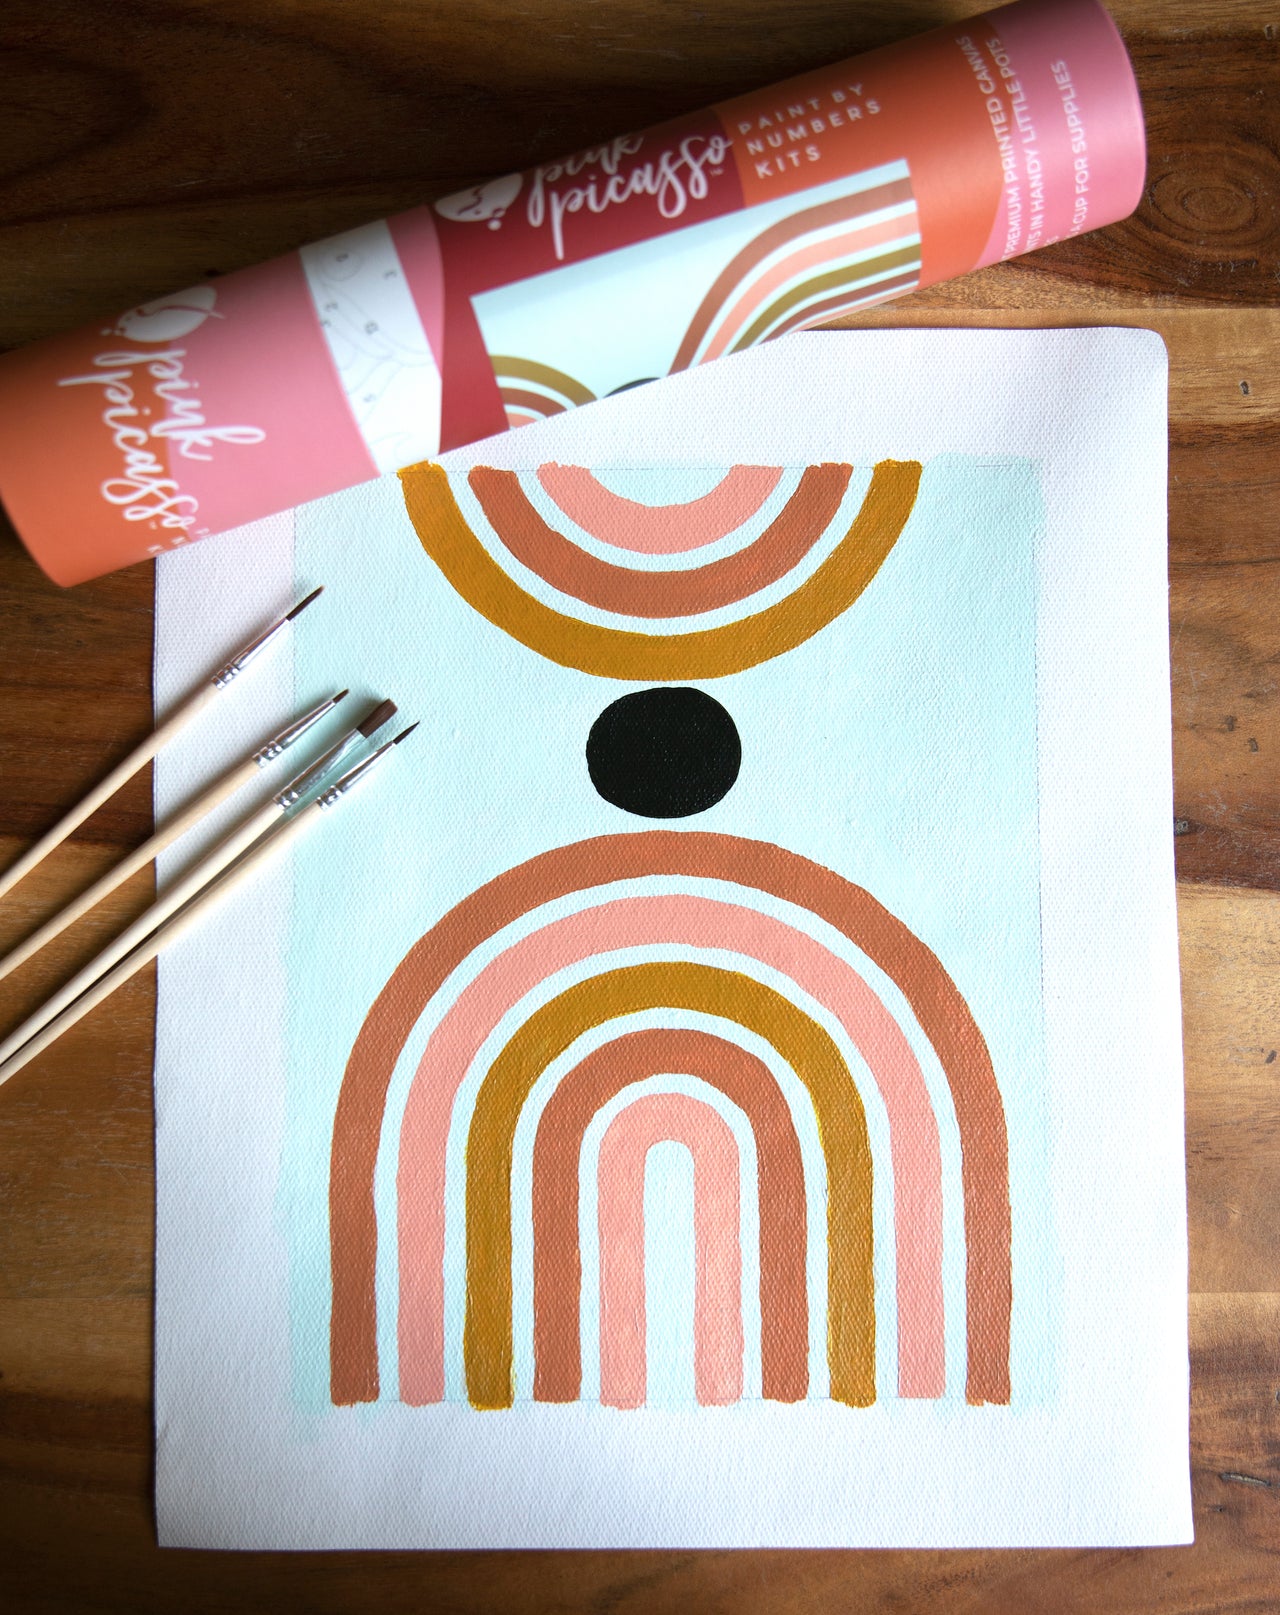 Find Your Balance - Pink Picasso Kits